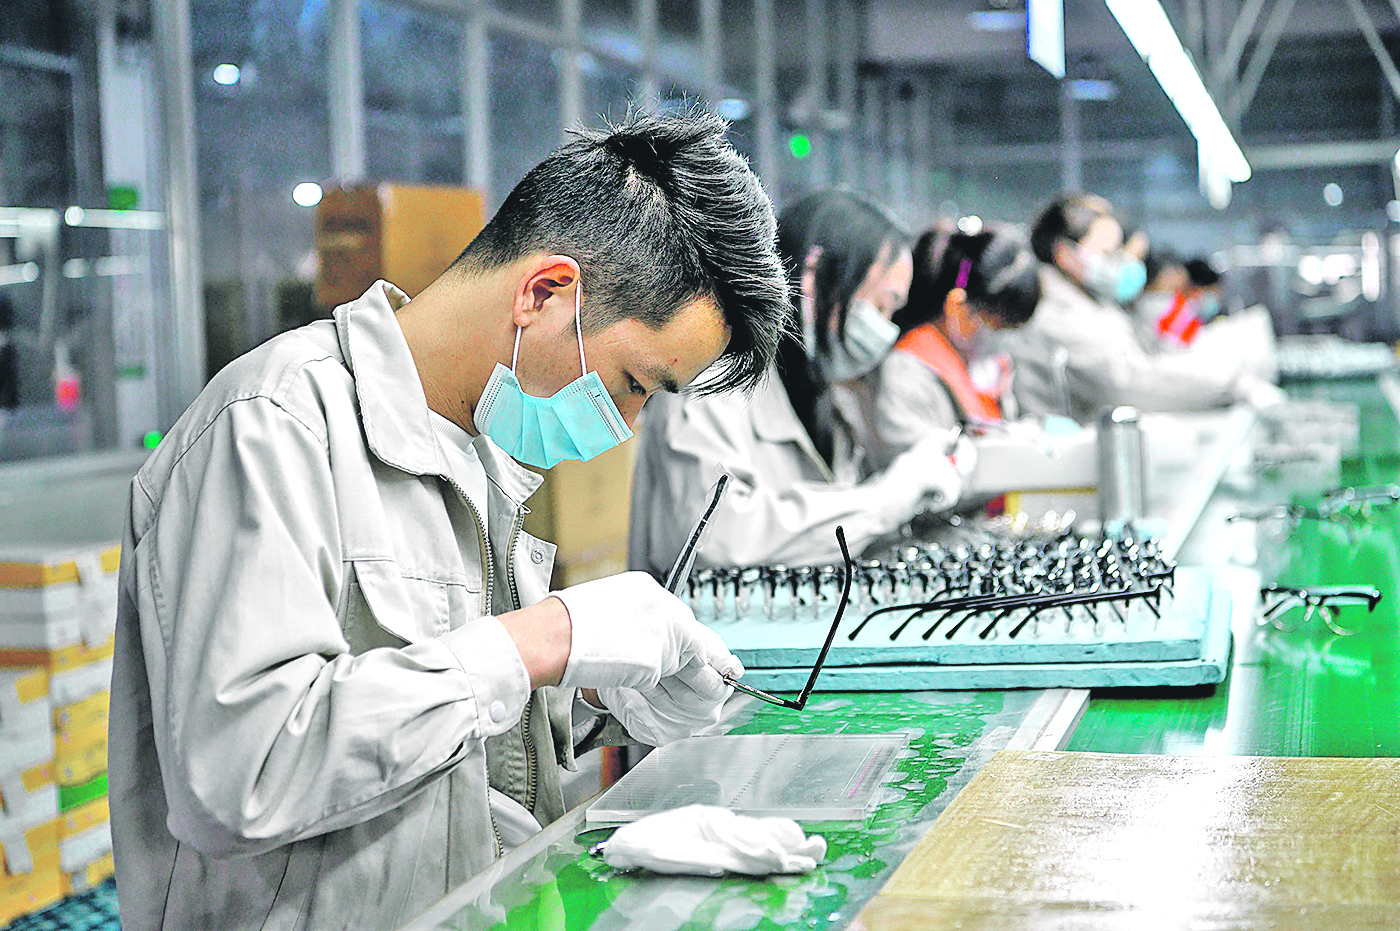 (FILES) This file photo taken on February 28, 2020 shows workers wearing facemasks polishing eyeglass frames at the Azure Eyeglasses Company in Wenzhou. - China's coronavirus epidemic turned a Lunar New Year family reunion into an endless quarantine for factory worker Hu Aihua, preventing him from returning to work in another province. (Photo by NOEL CELIS / AFP) / TO GO WITH HEALTH-VIRUS-CHINA-ECONOMY-EMPLOYMENT BY BEIYI SEOW